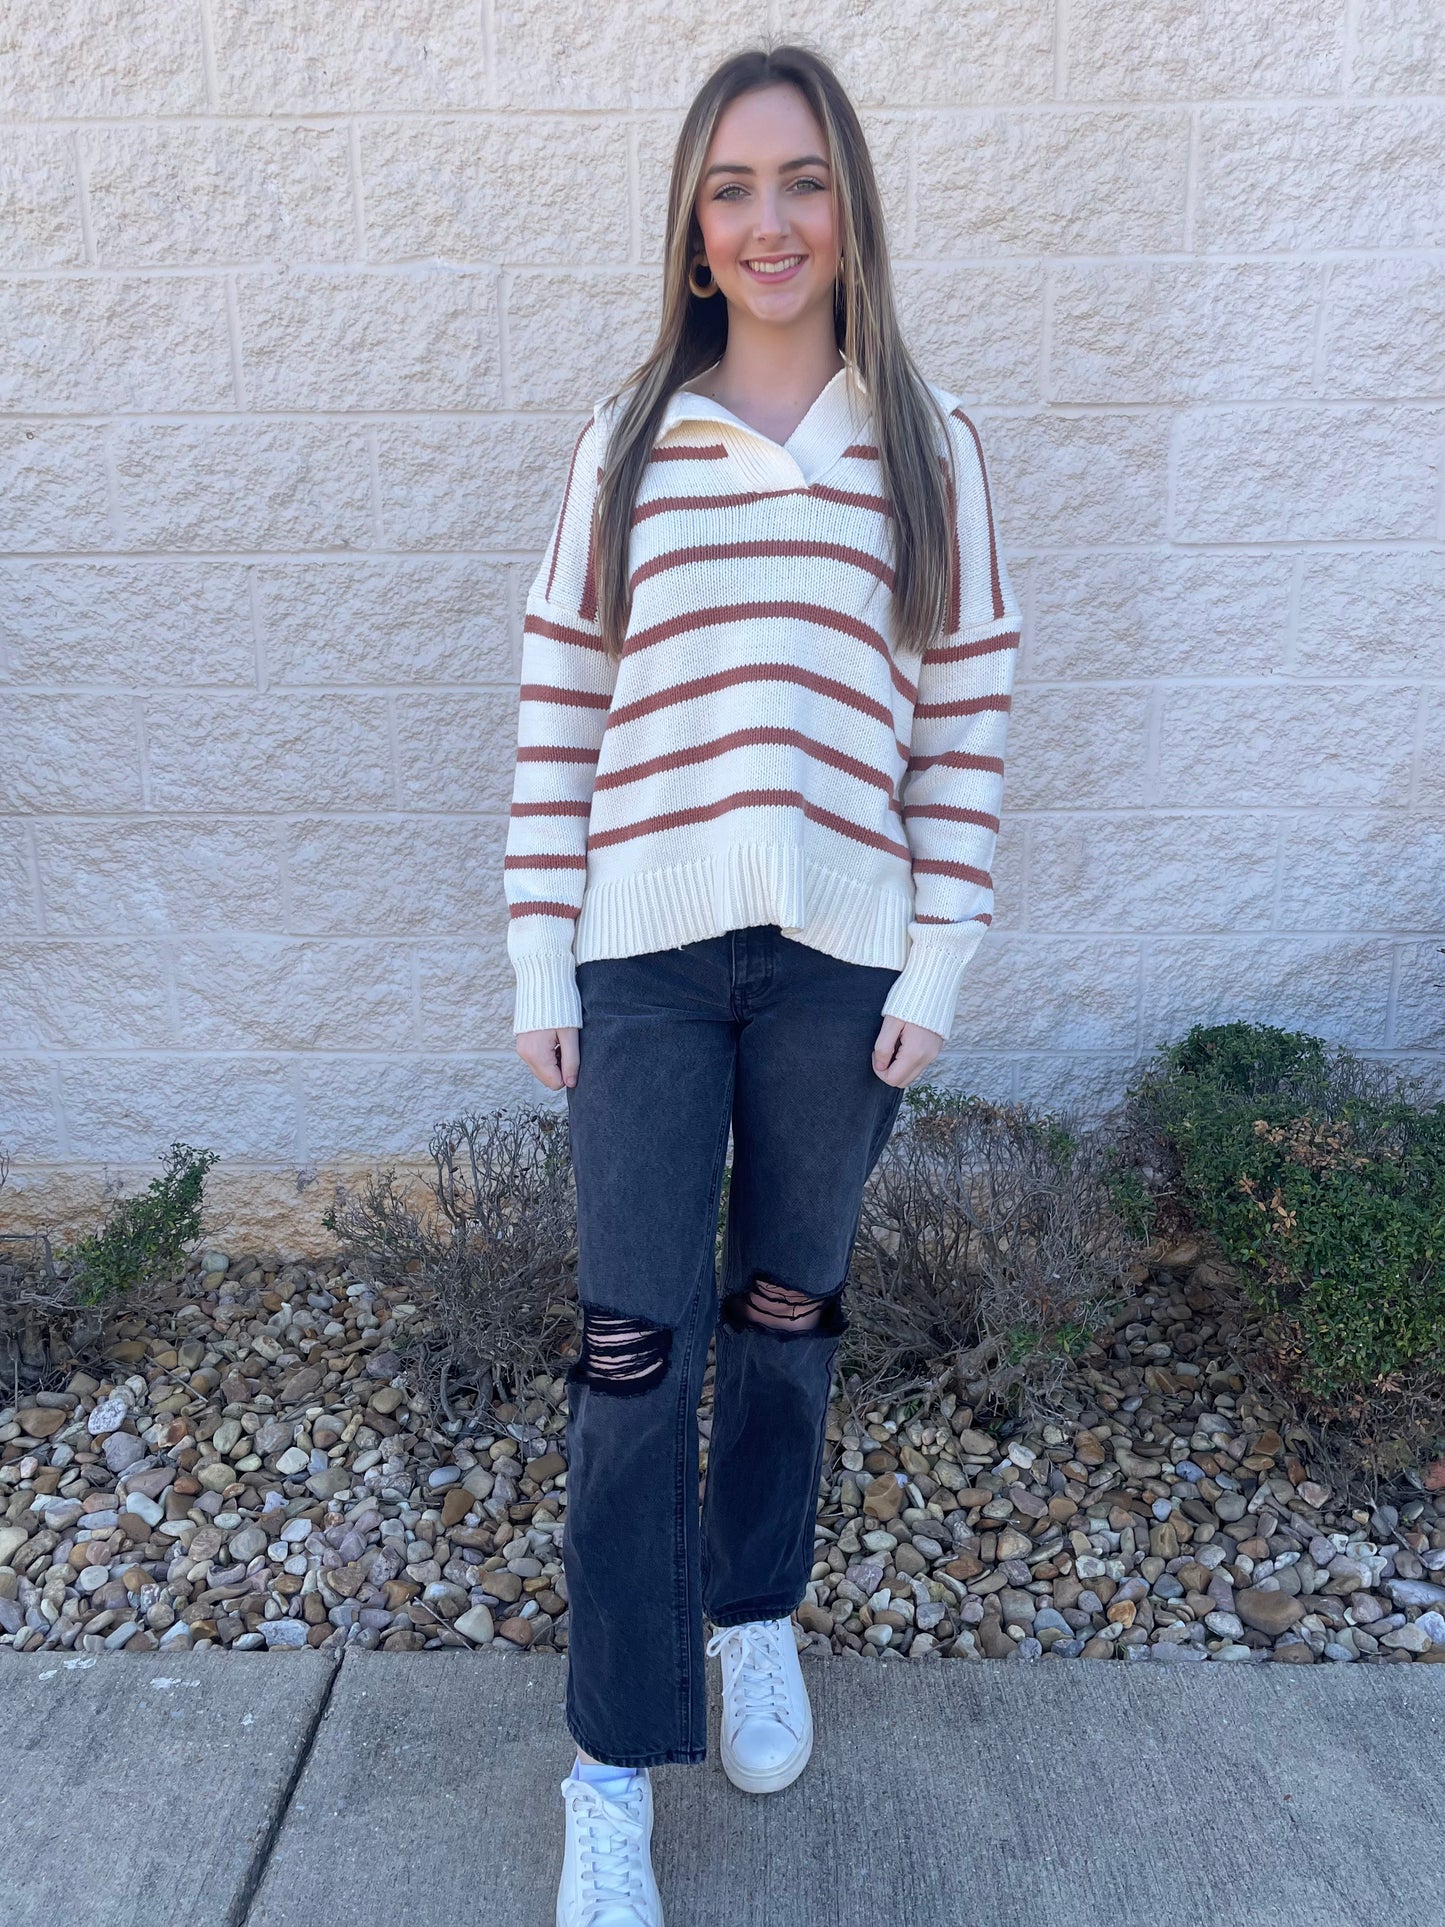 Go Getter Ivory Striped Sweater